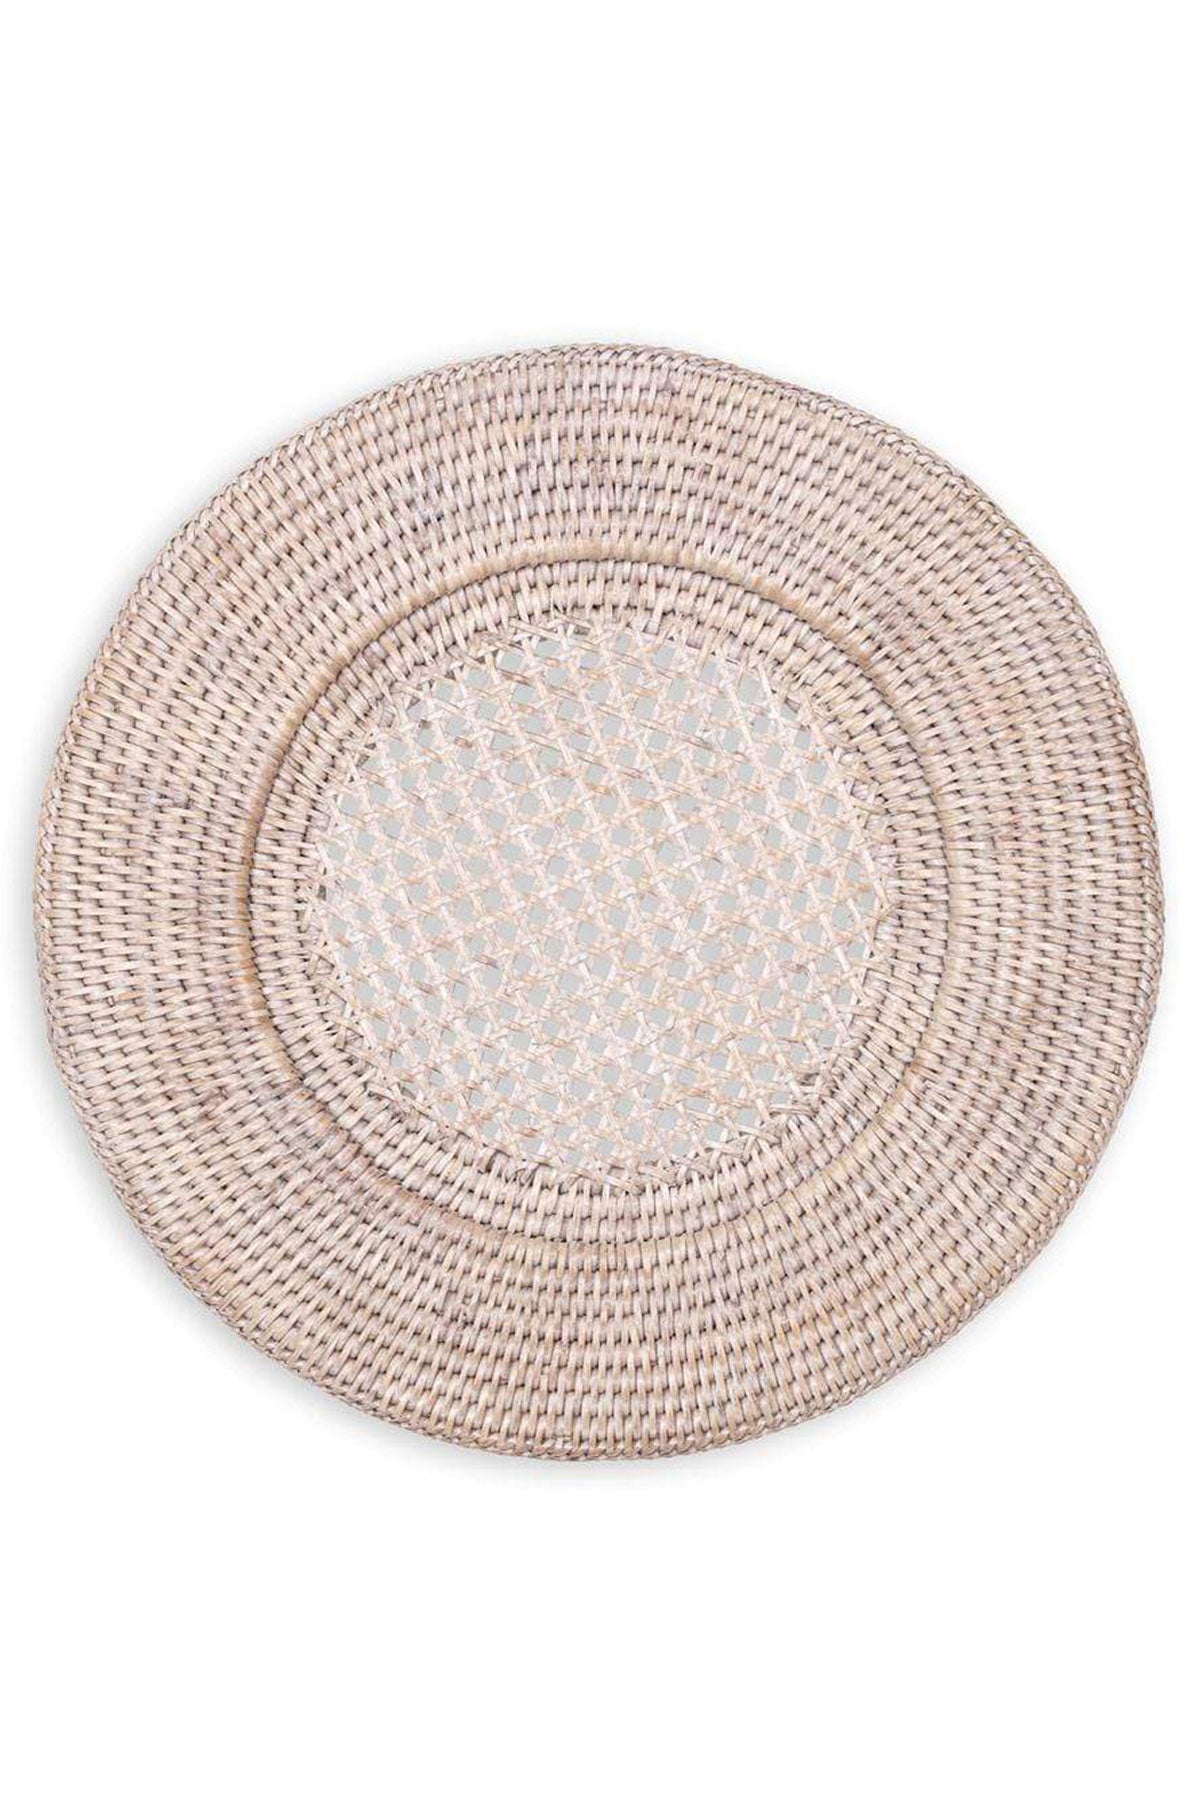 Rattan Round Plate Charger in White Natural - shop-olivia.com